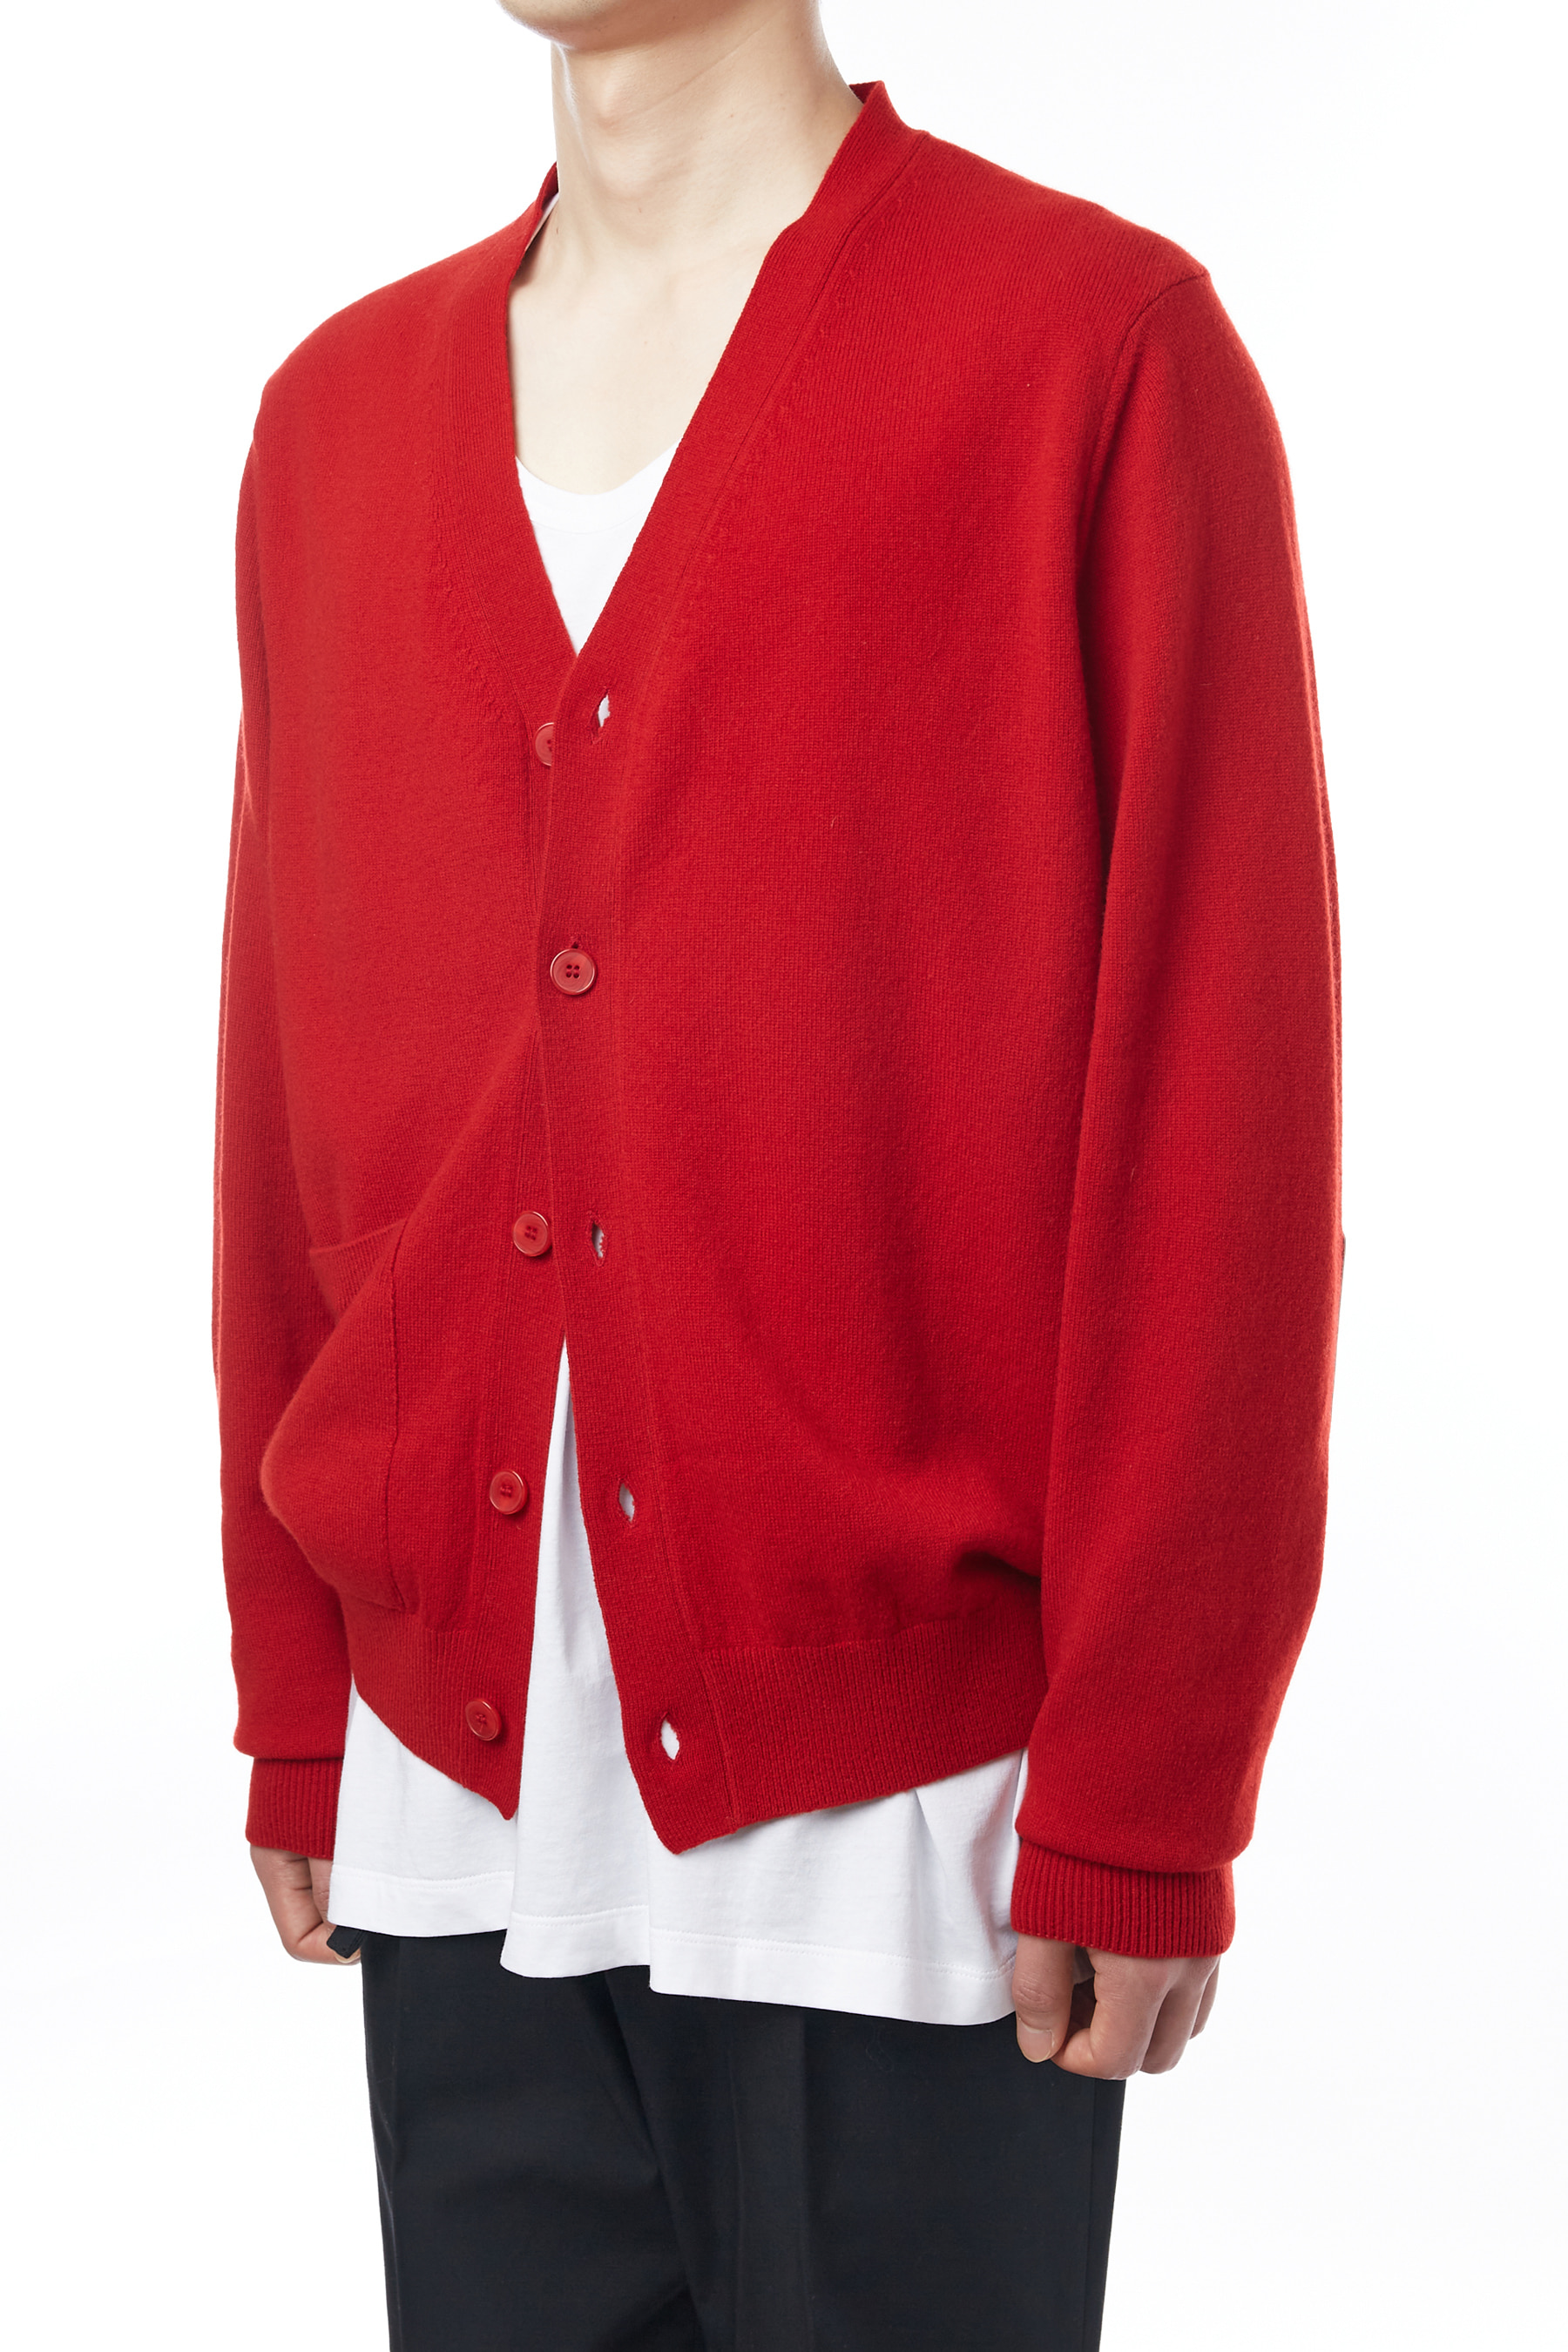 RED ROVER WOOL CARDIGAN 02-2